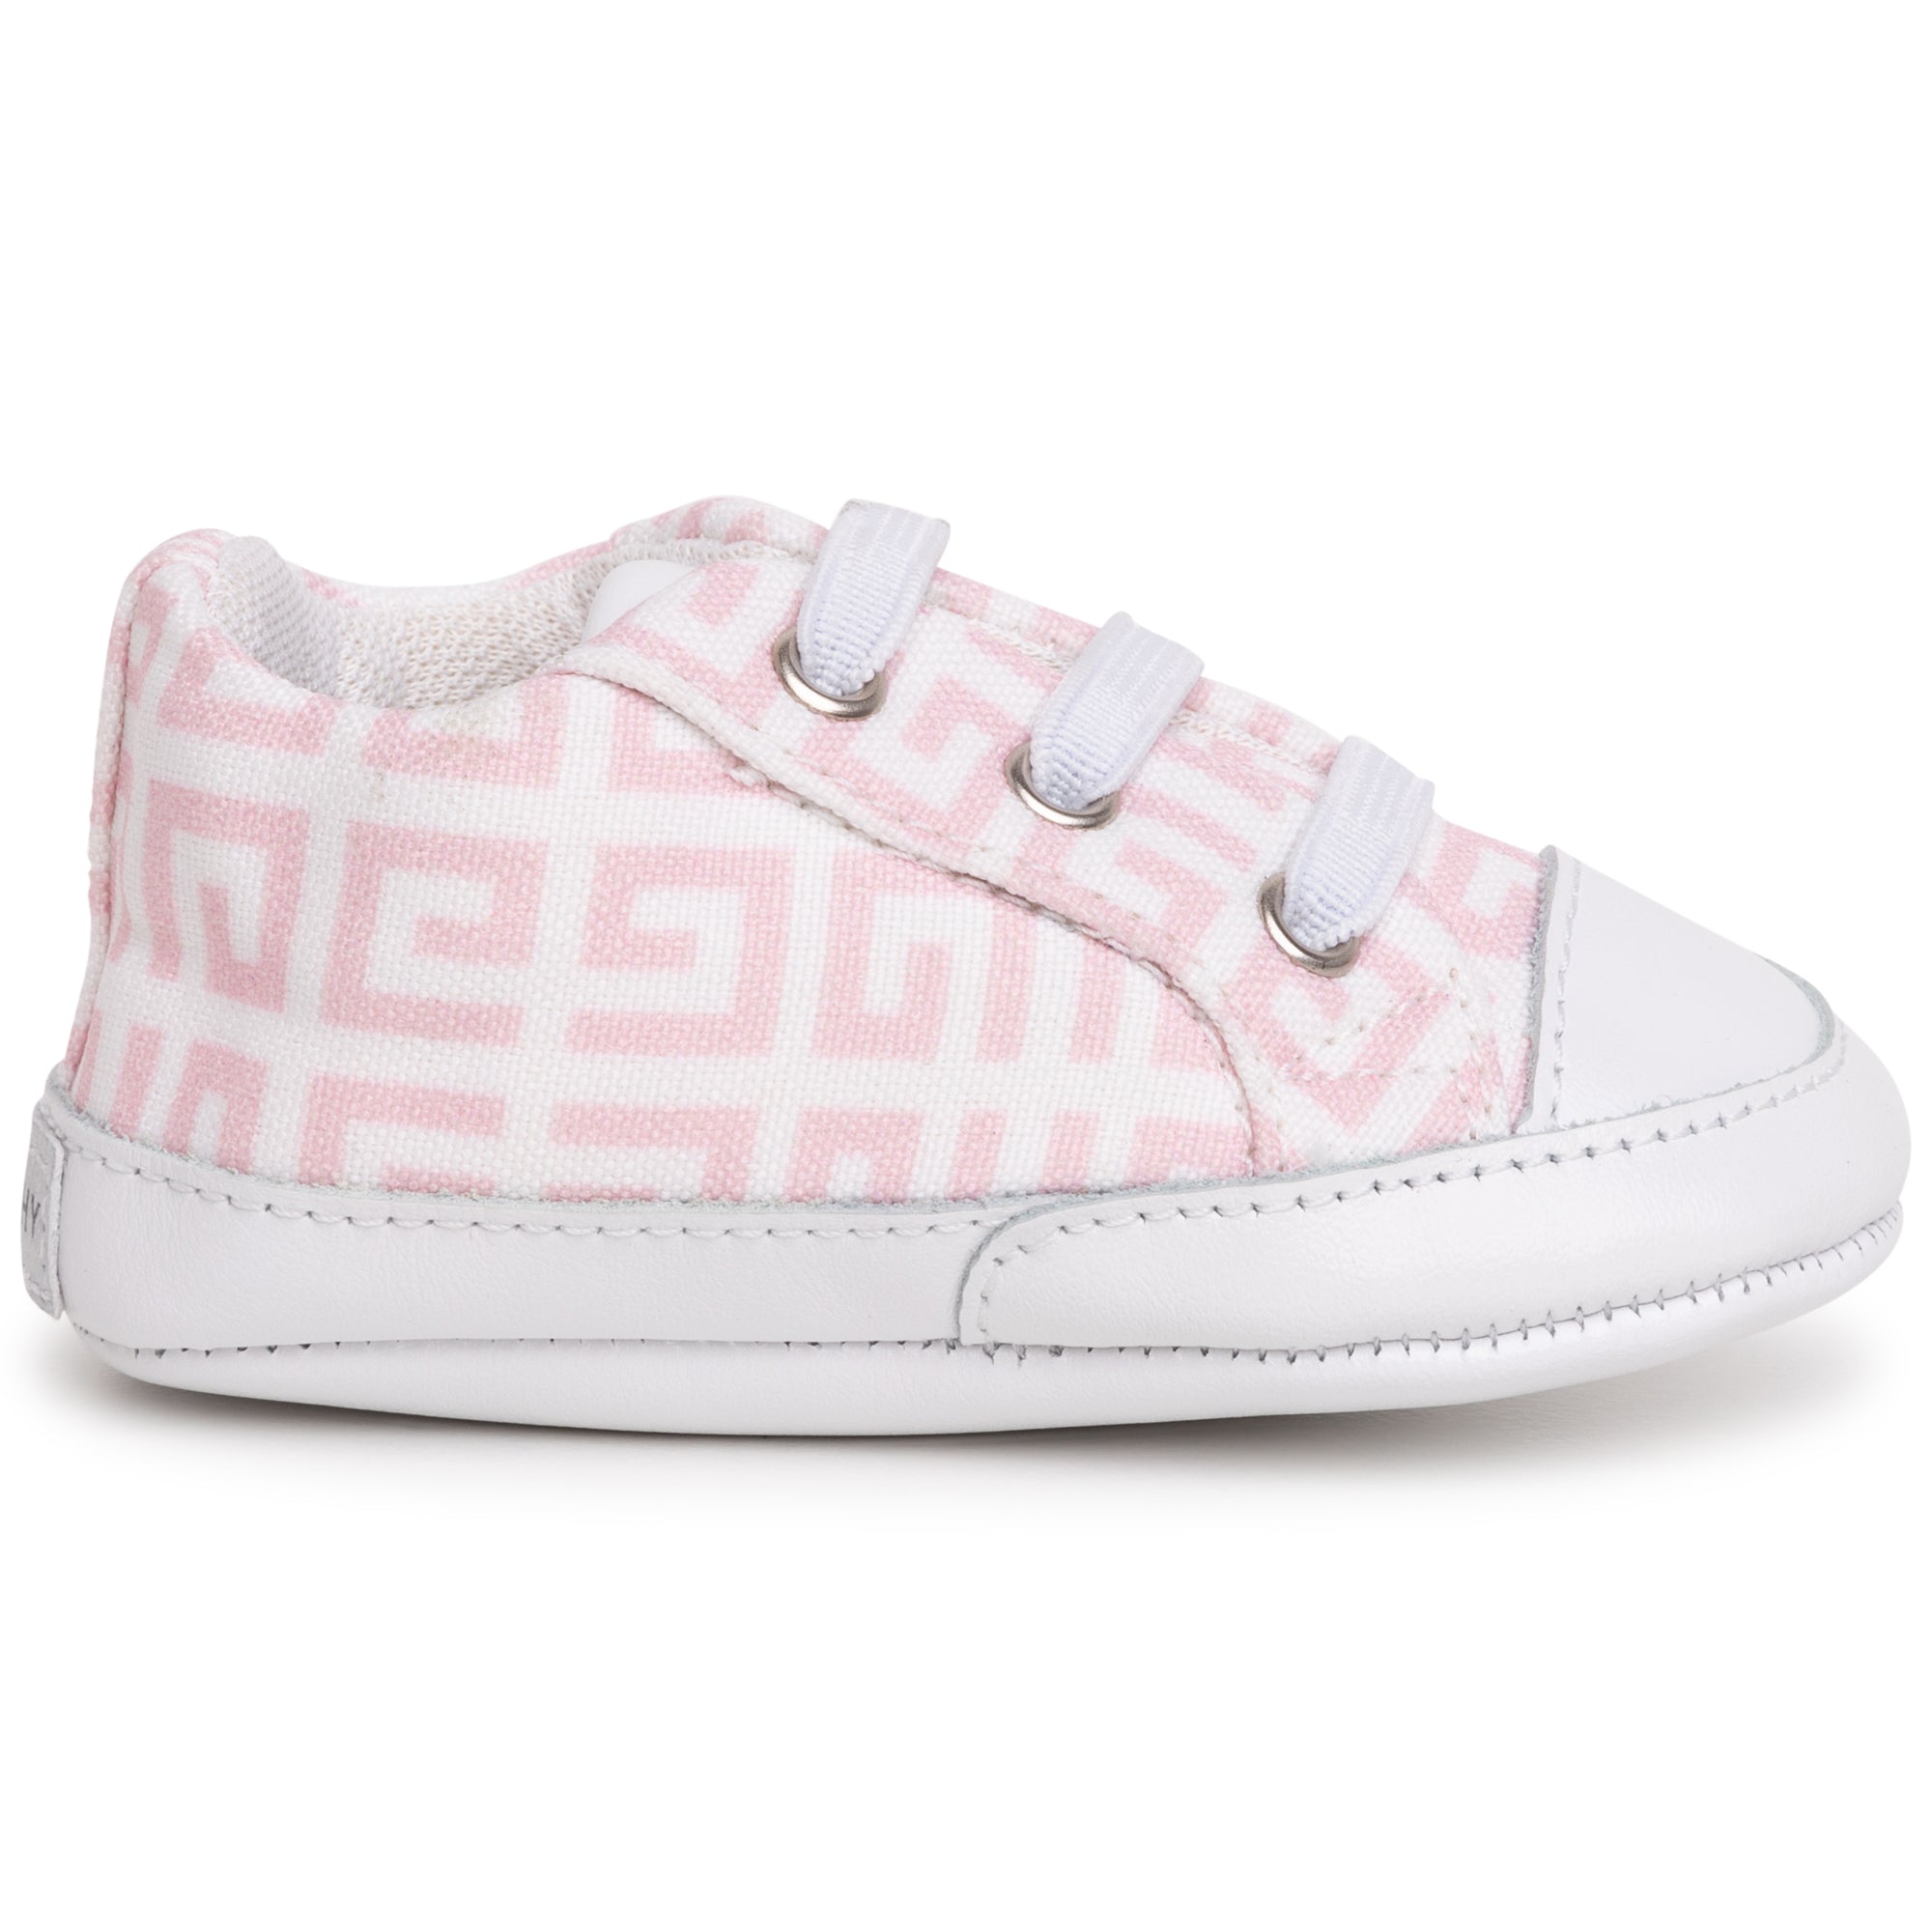 Baby Girls White Shoes